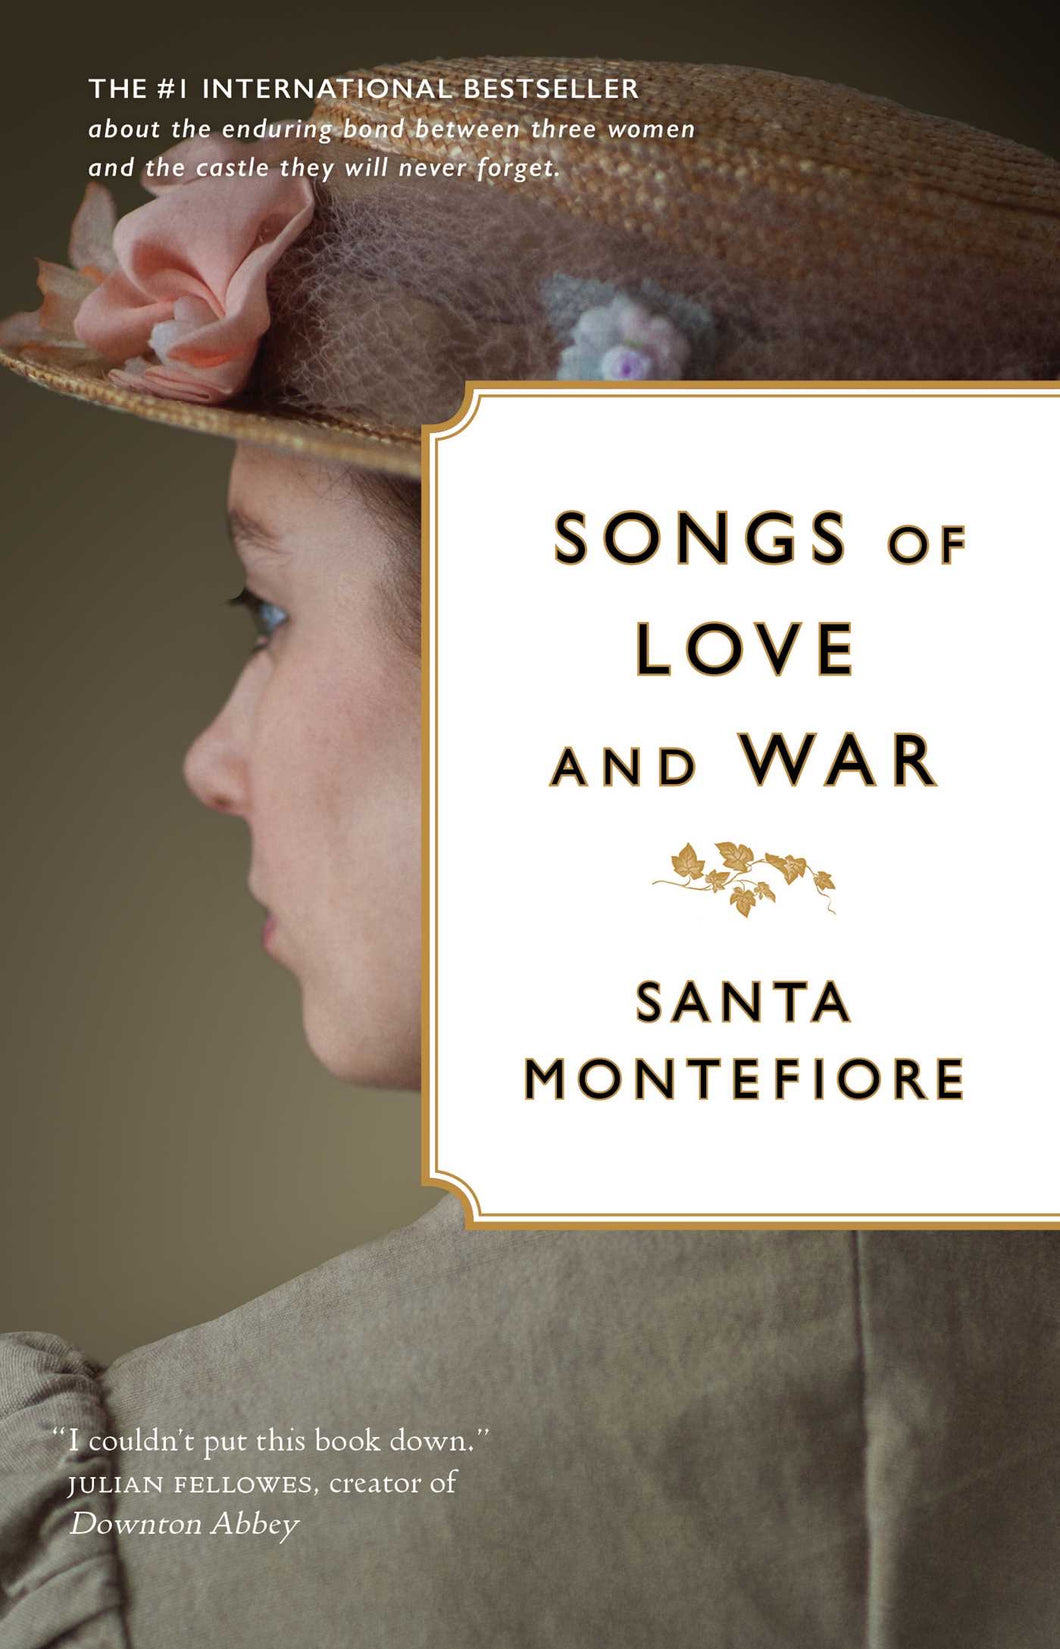 Songs of Love and War